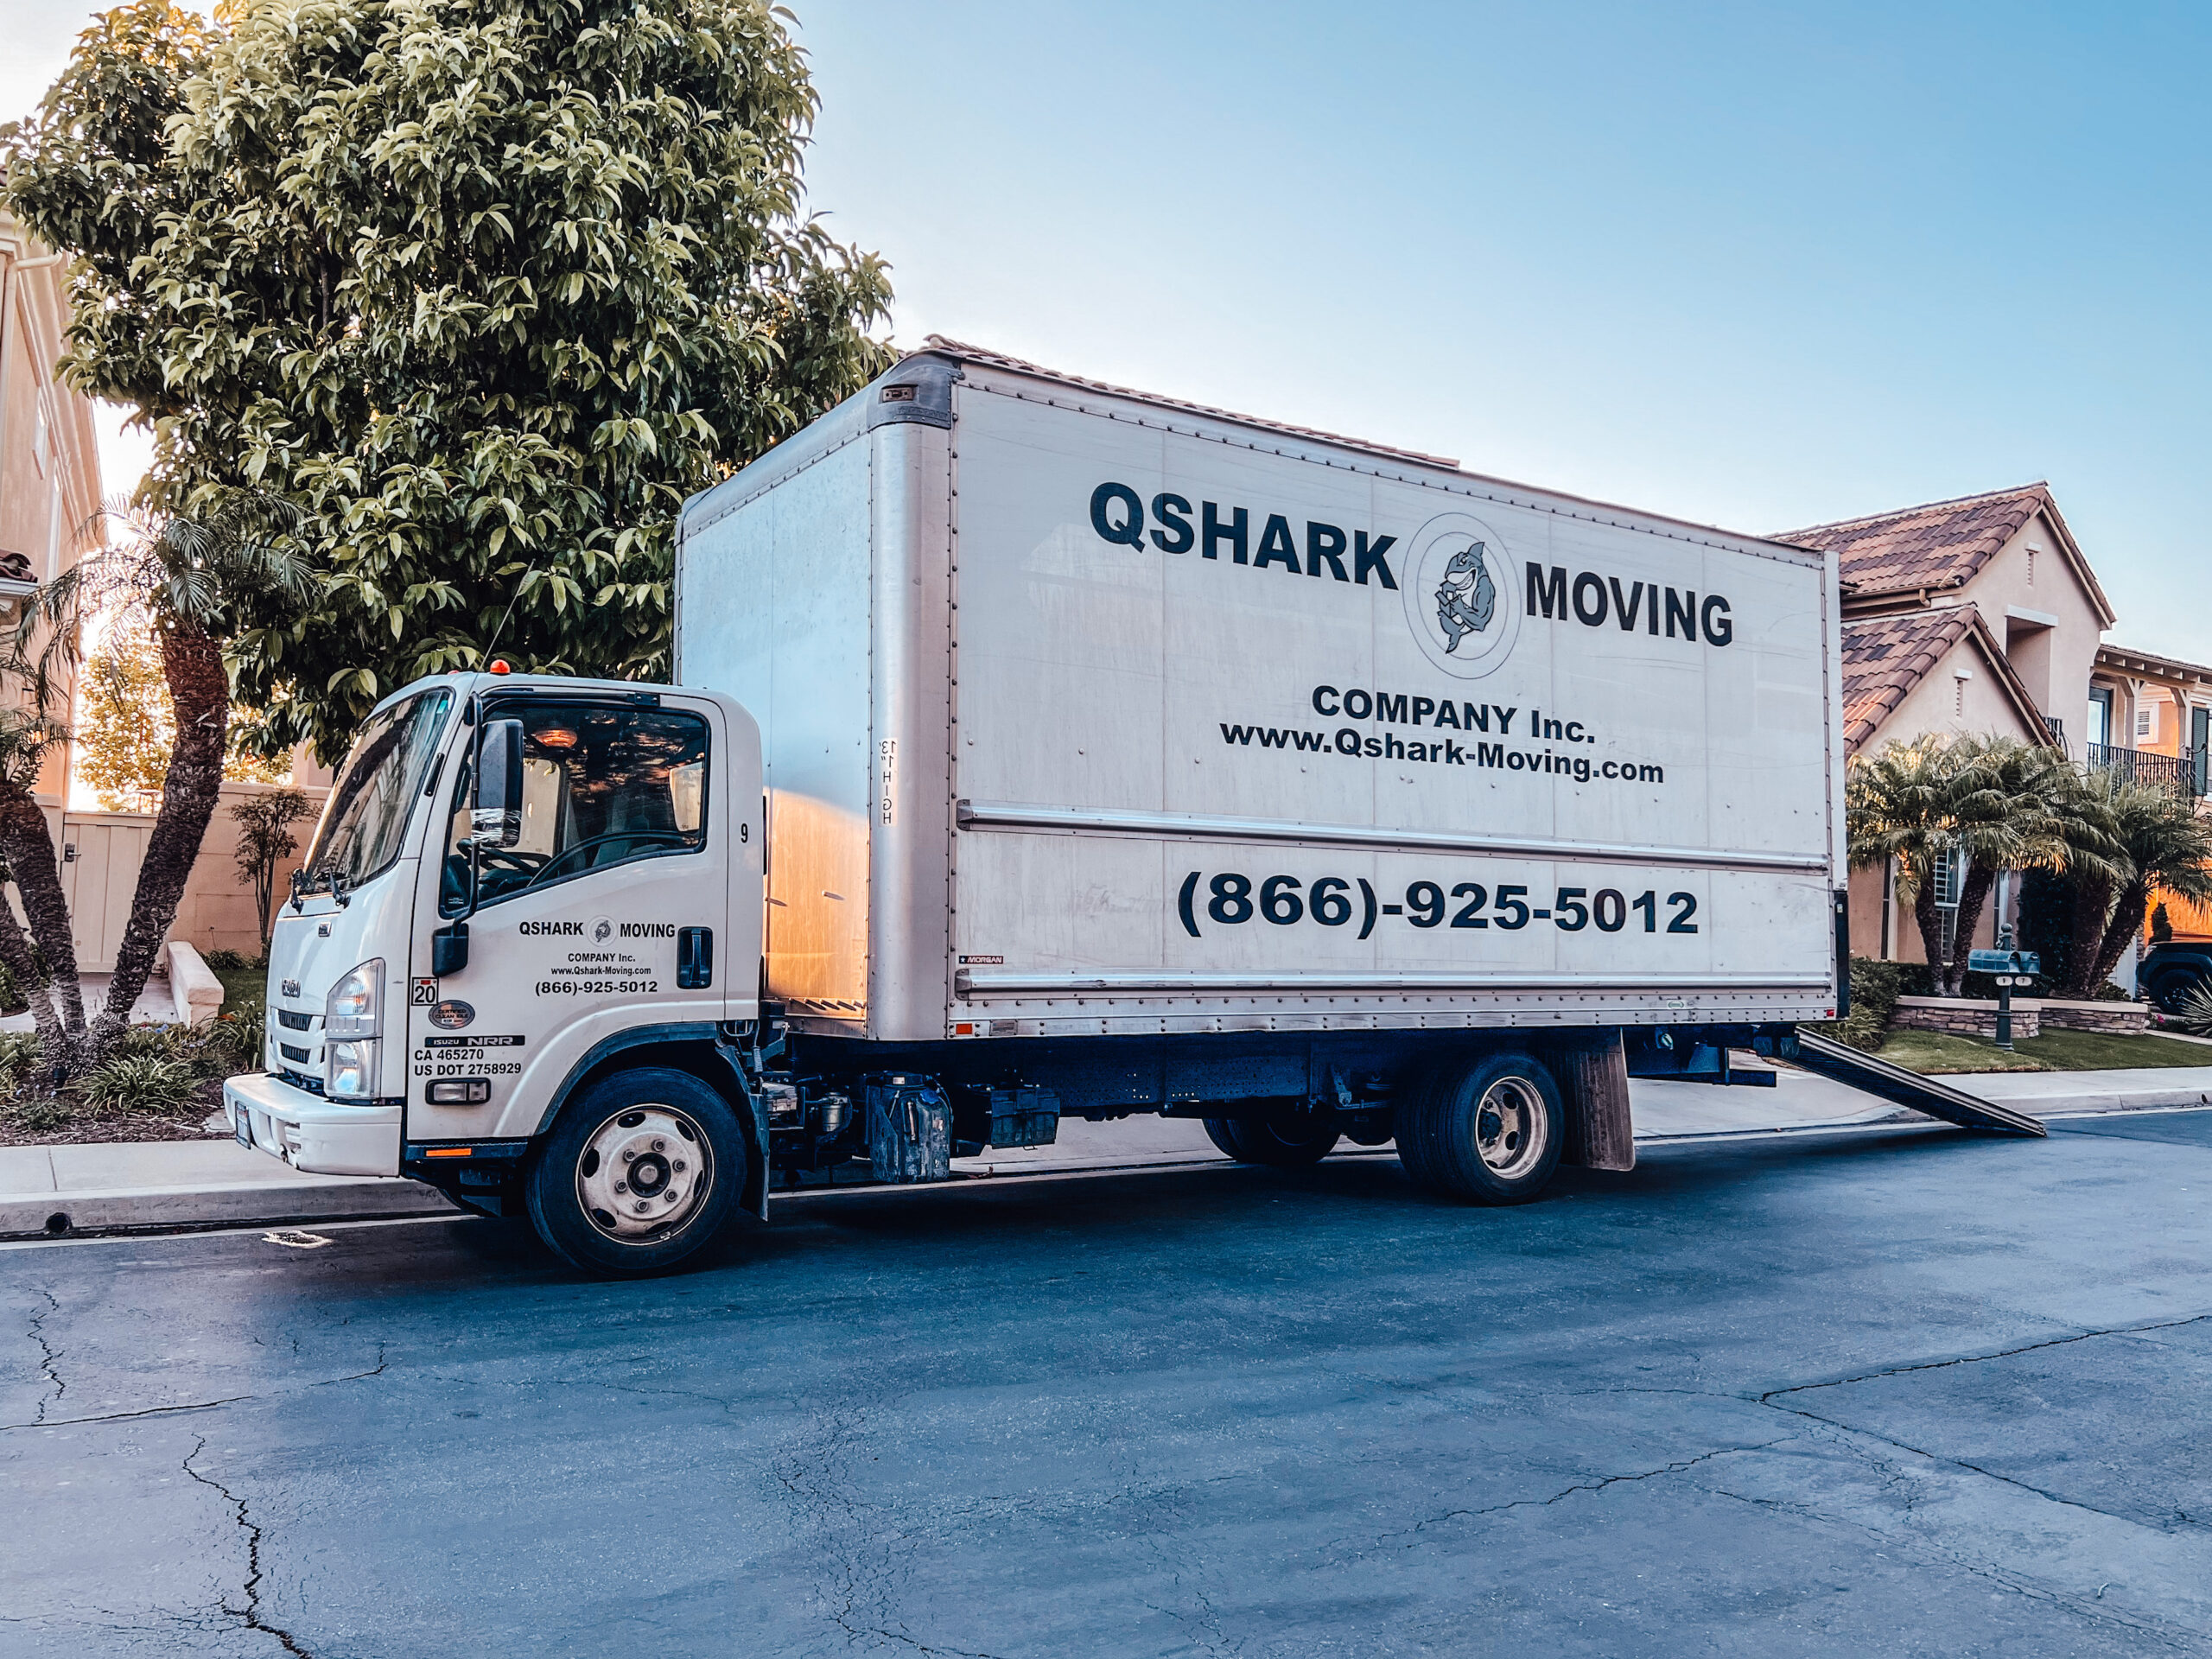 Qshark Moving Truck, they come in different colors and sizes